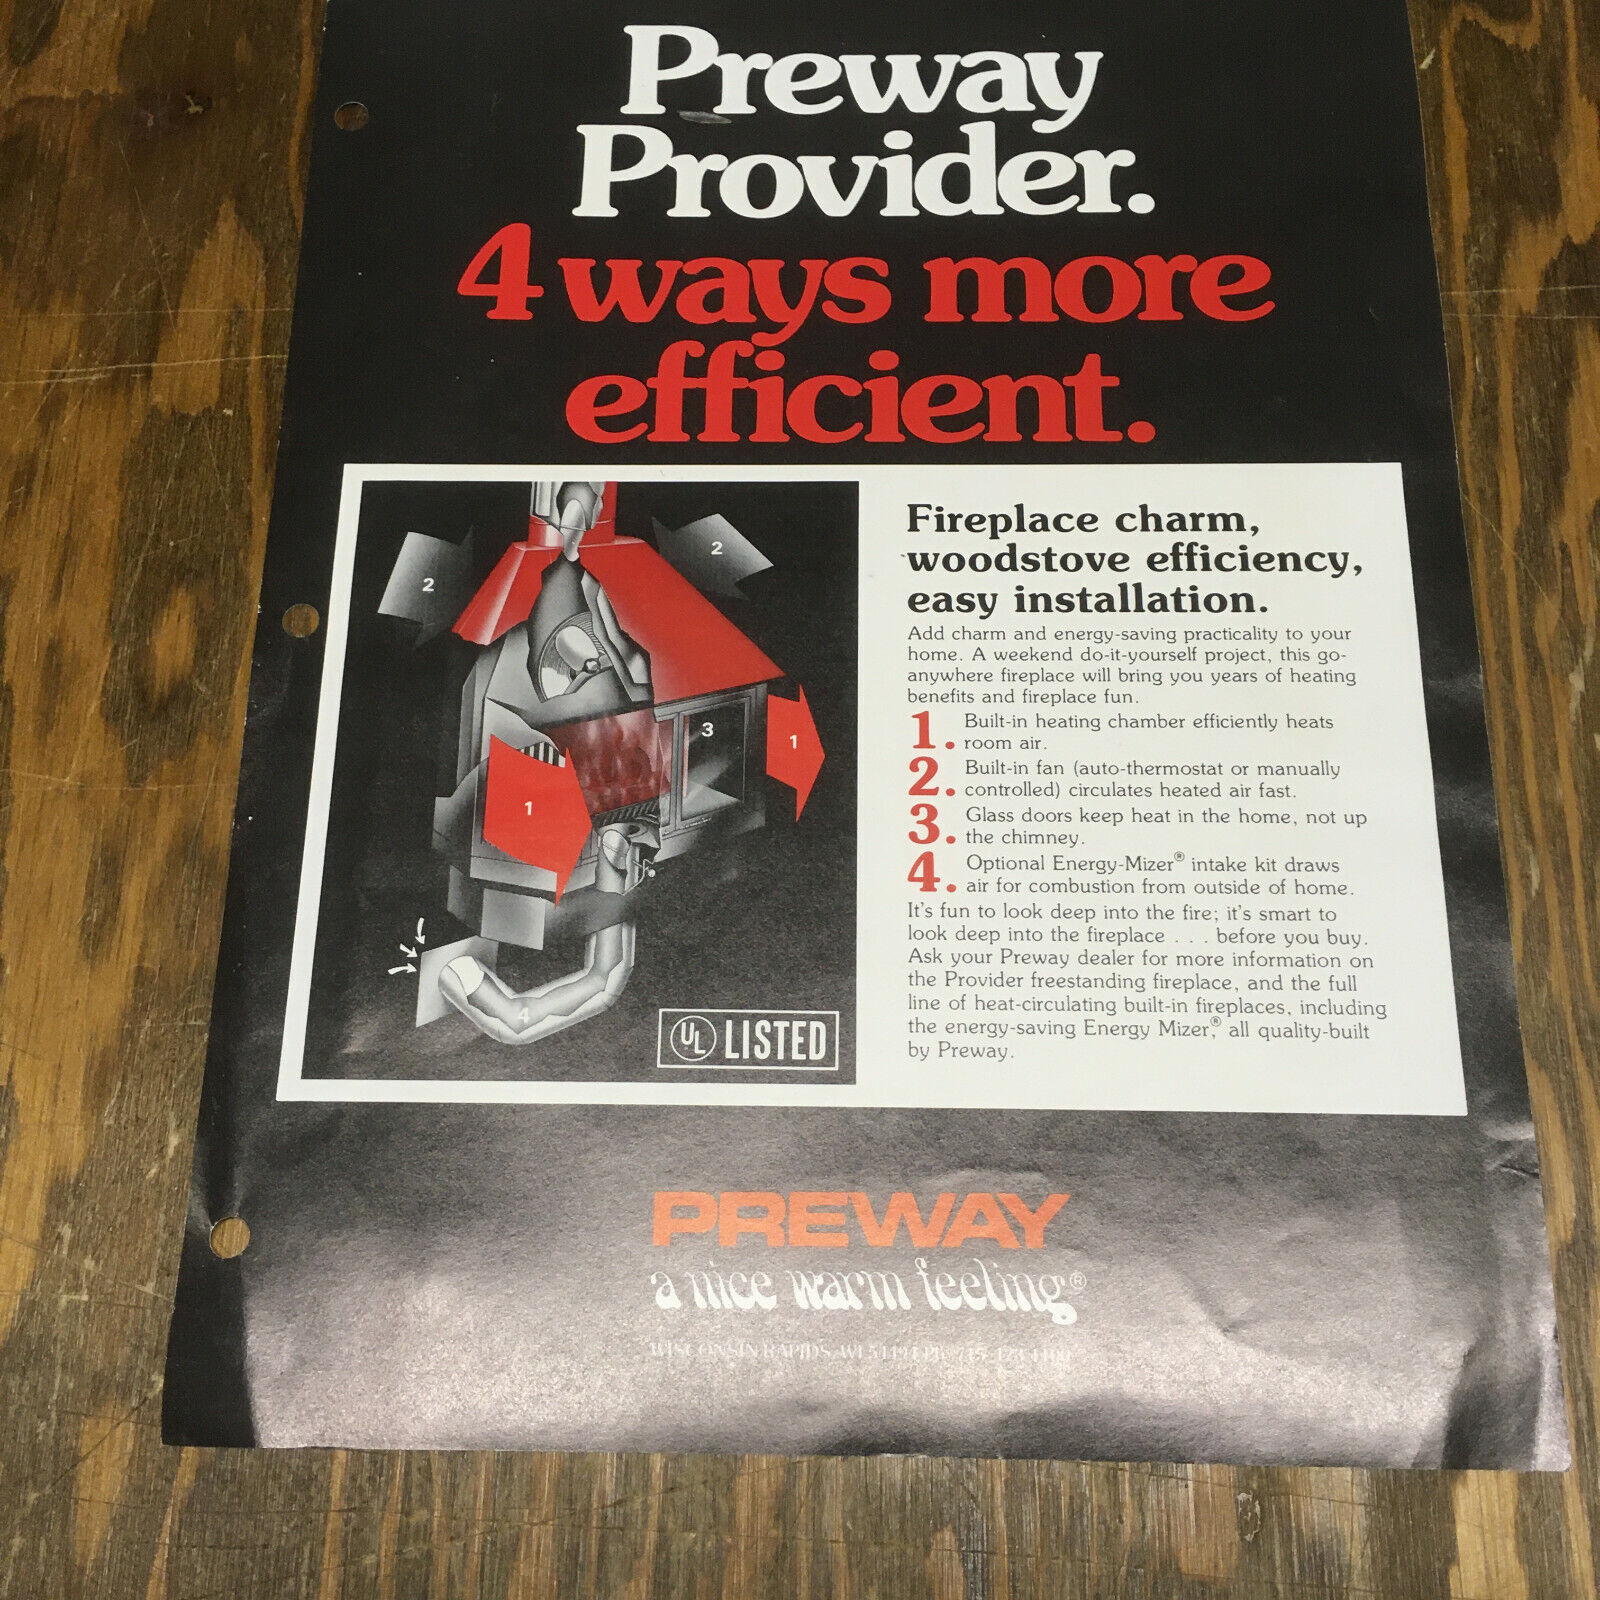  Vintage paper ad for Preway provider fireplace charm wood stove efficiency  